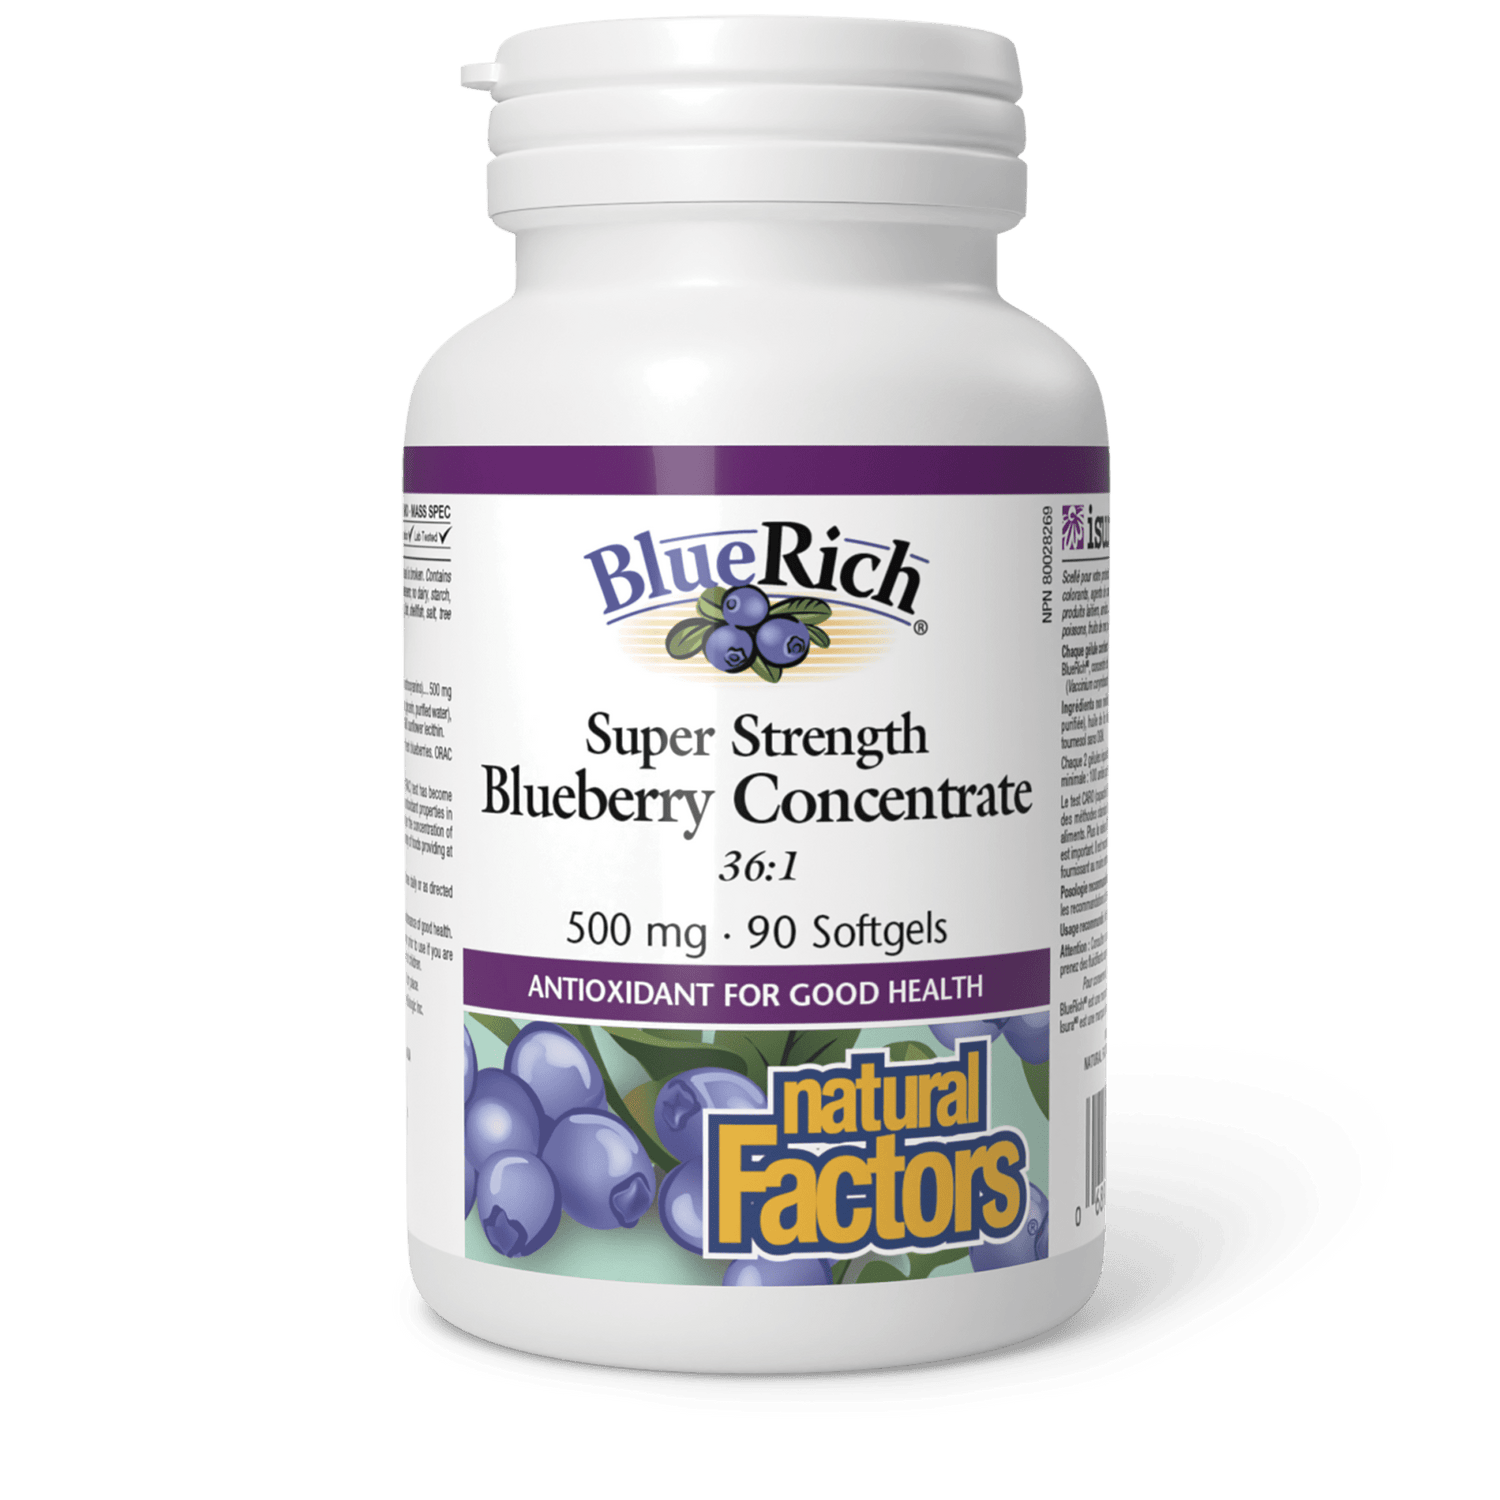 BlueRich Super Strength Blueberry Concentrate 500 mg, Natural Factors|v|image|4516